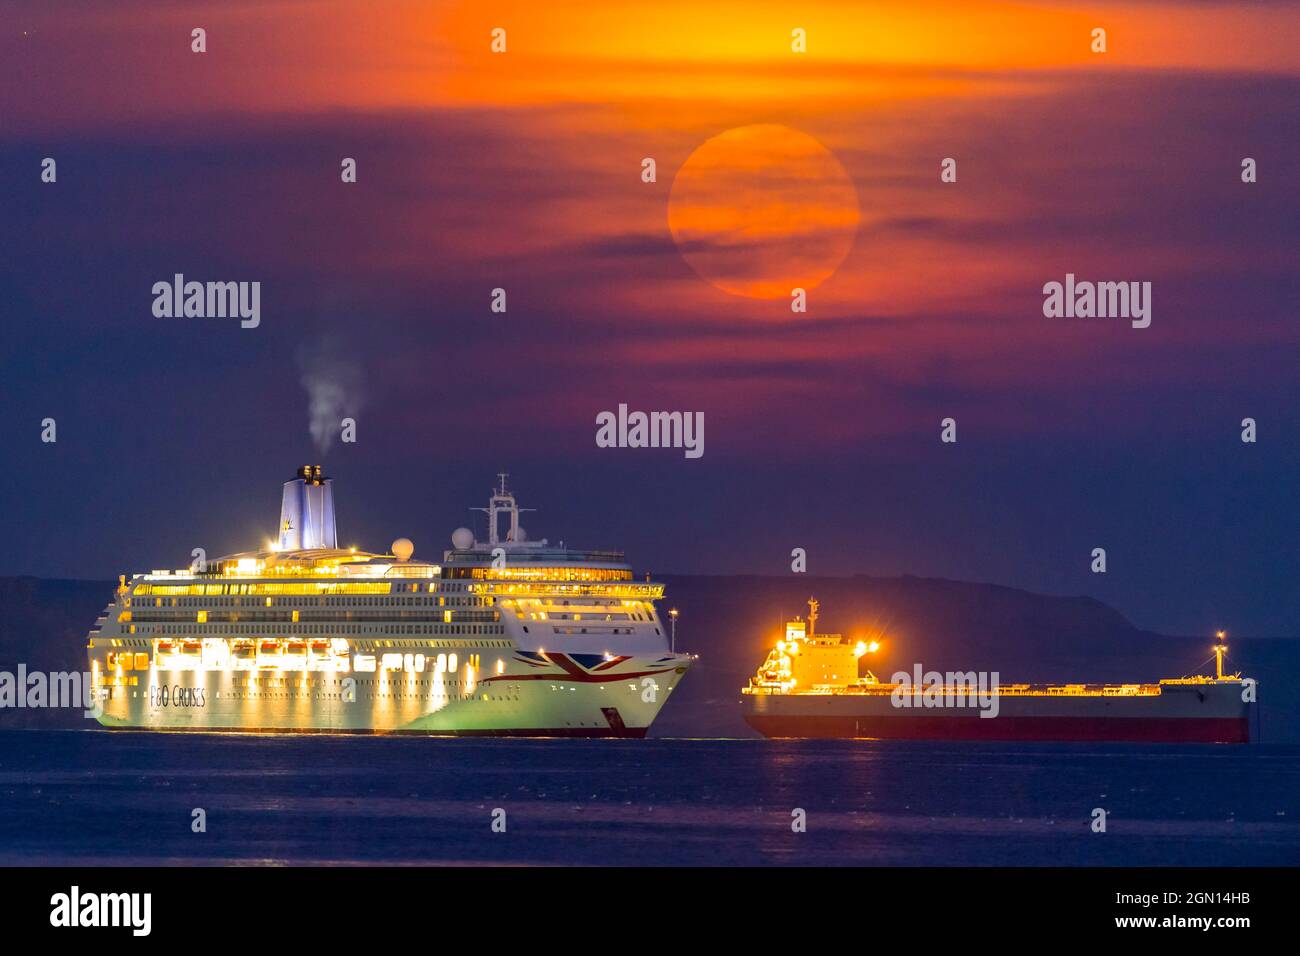 https://c8.alamy.com/comp/2GN14HB/weymouth-dorset-uk-21st-september-2021-uk-weather-the-harvest-moon-is-obscured-by-thin-high-clouds-as-it-rises-up-from-behind-the-po-cruise-ship-aurora-and-the-lemessos-castle-bulk-carrier-which-are-anchored-in-the-bay-at-weymouth-in-dorset-the-on-the-last-day-of-astronomical-summer-picture-credit-graham-huntalamy-live-news-2GN14HB.jpg